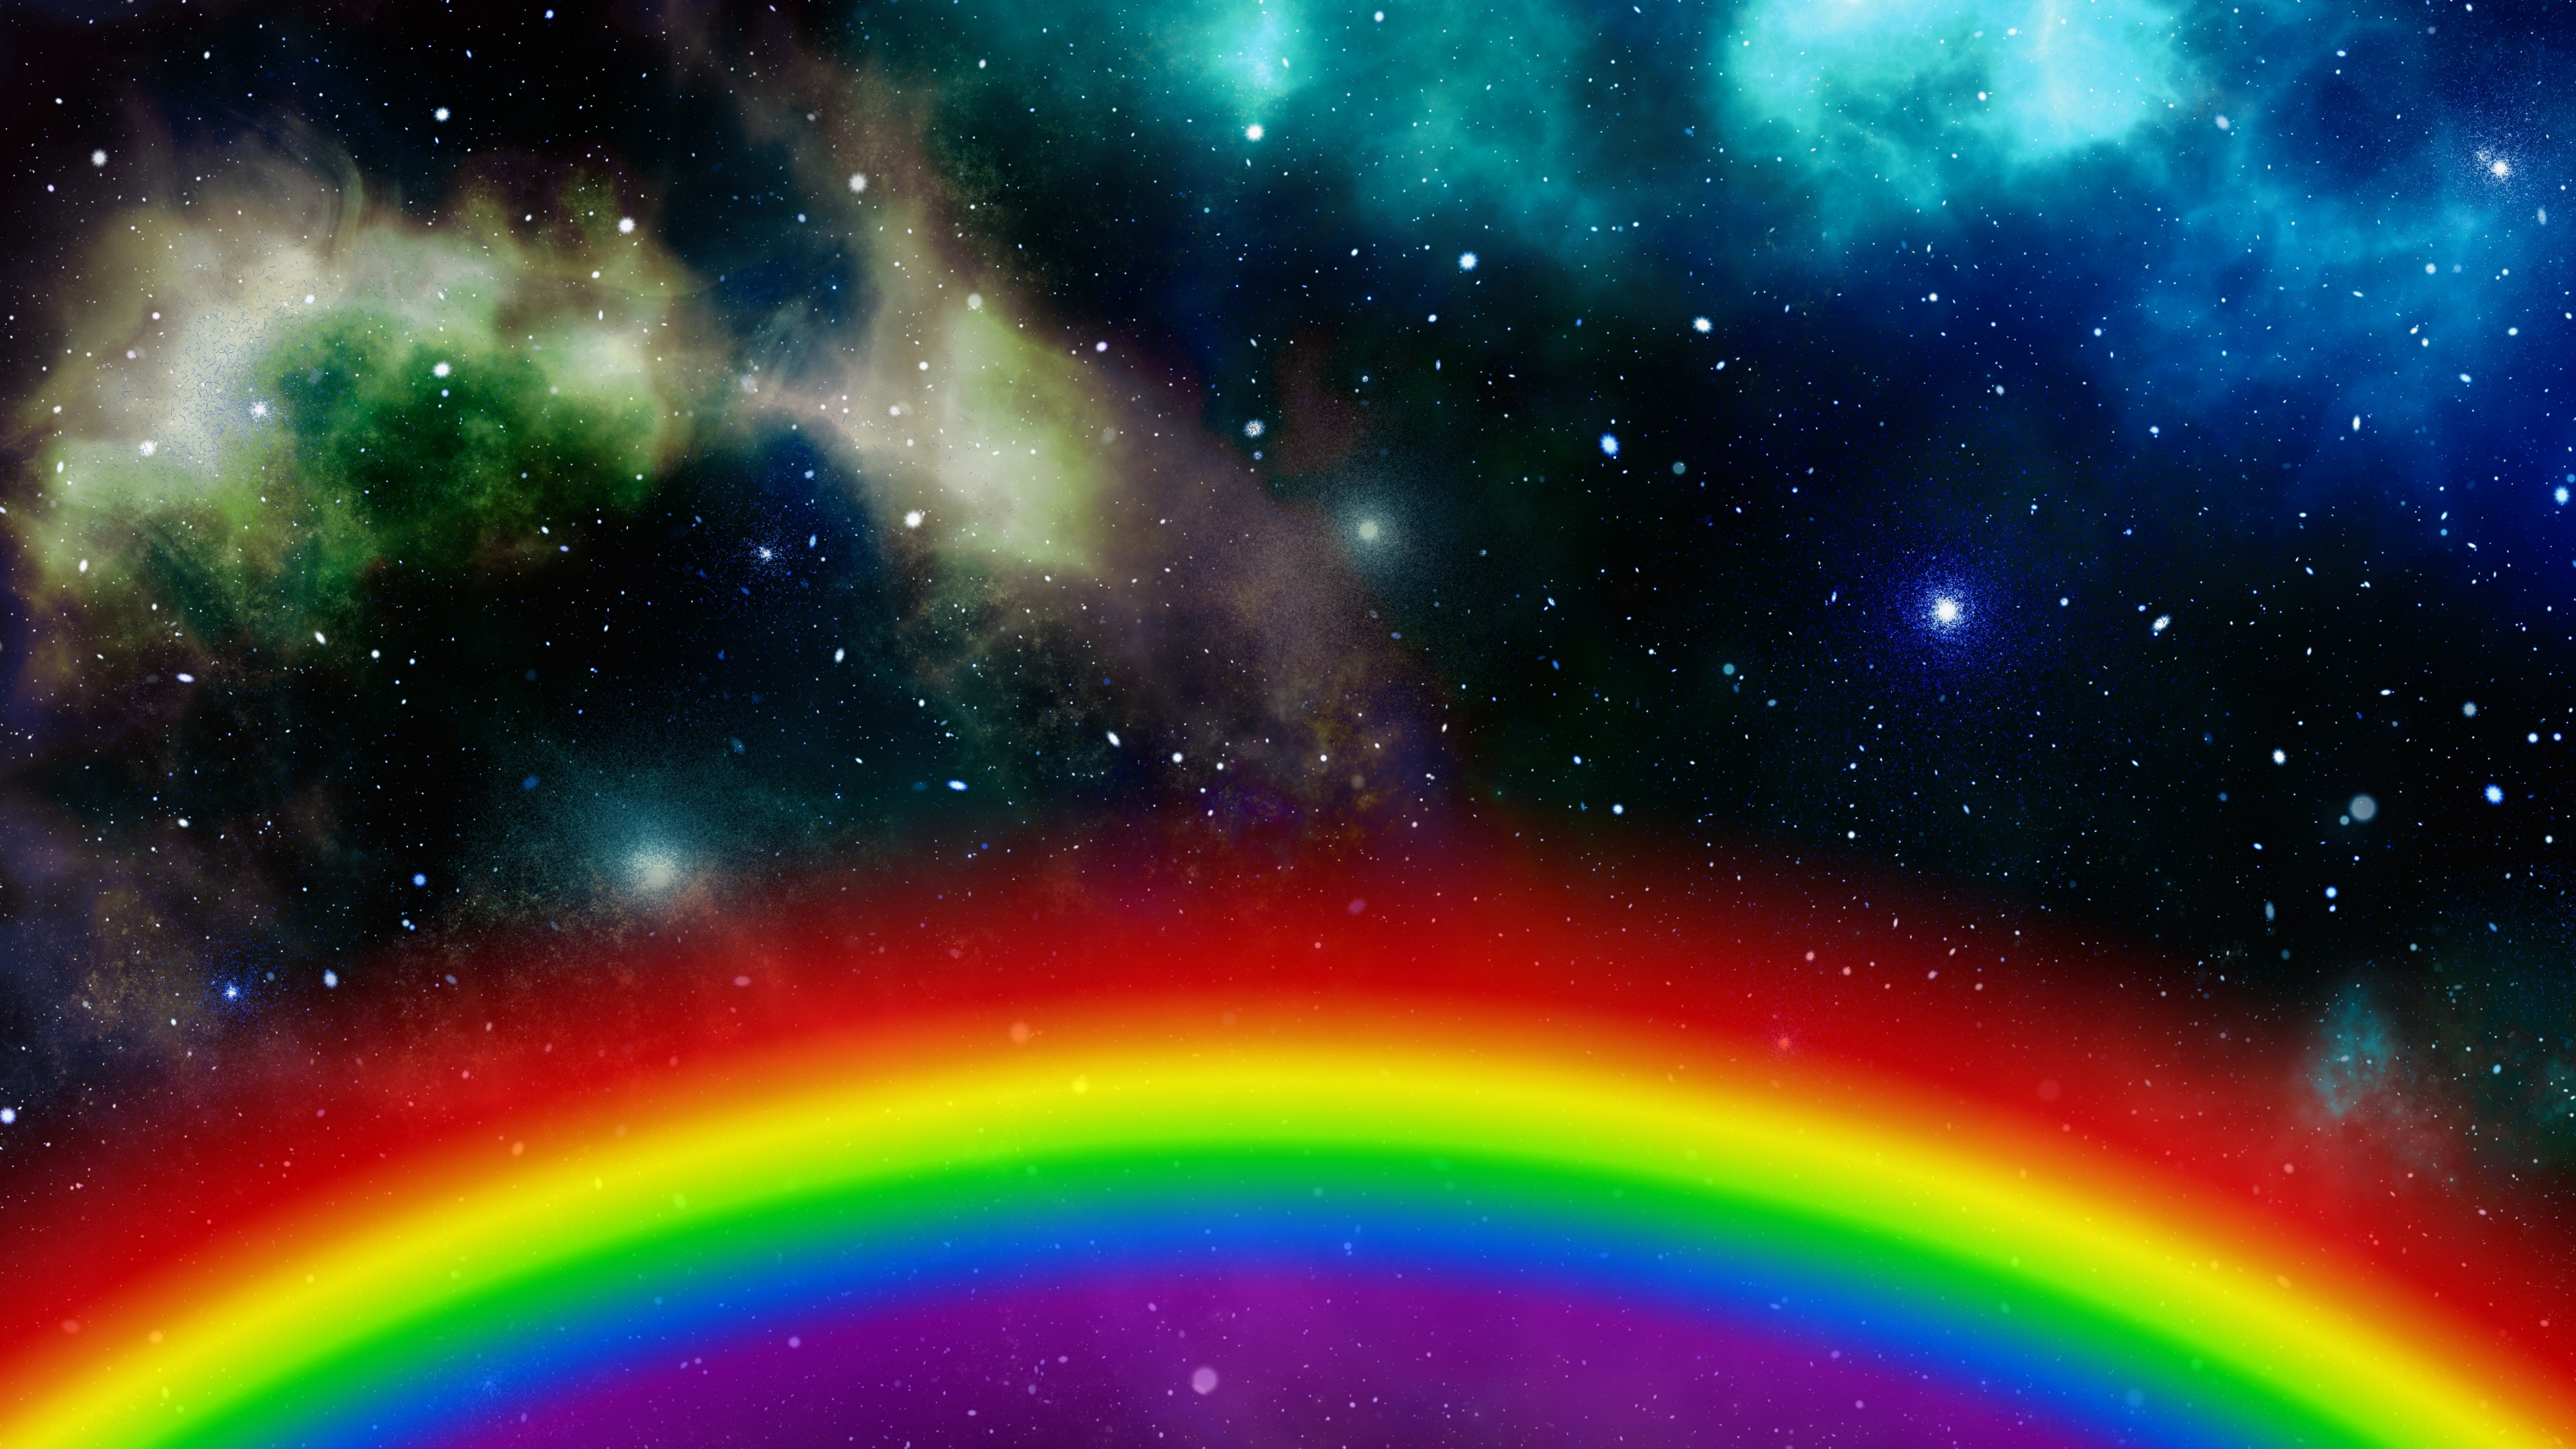 Download Rainbow, colorful, space, clouds, art wallpaper, 3840x 4K UHD 16: Widescreen